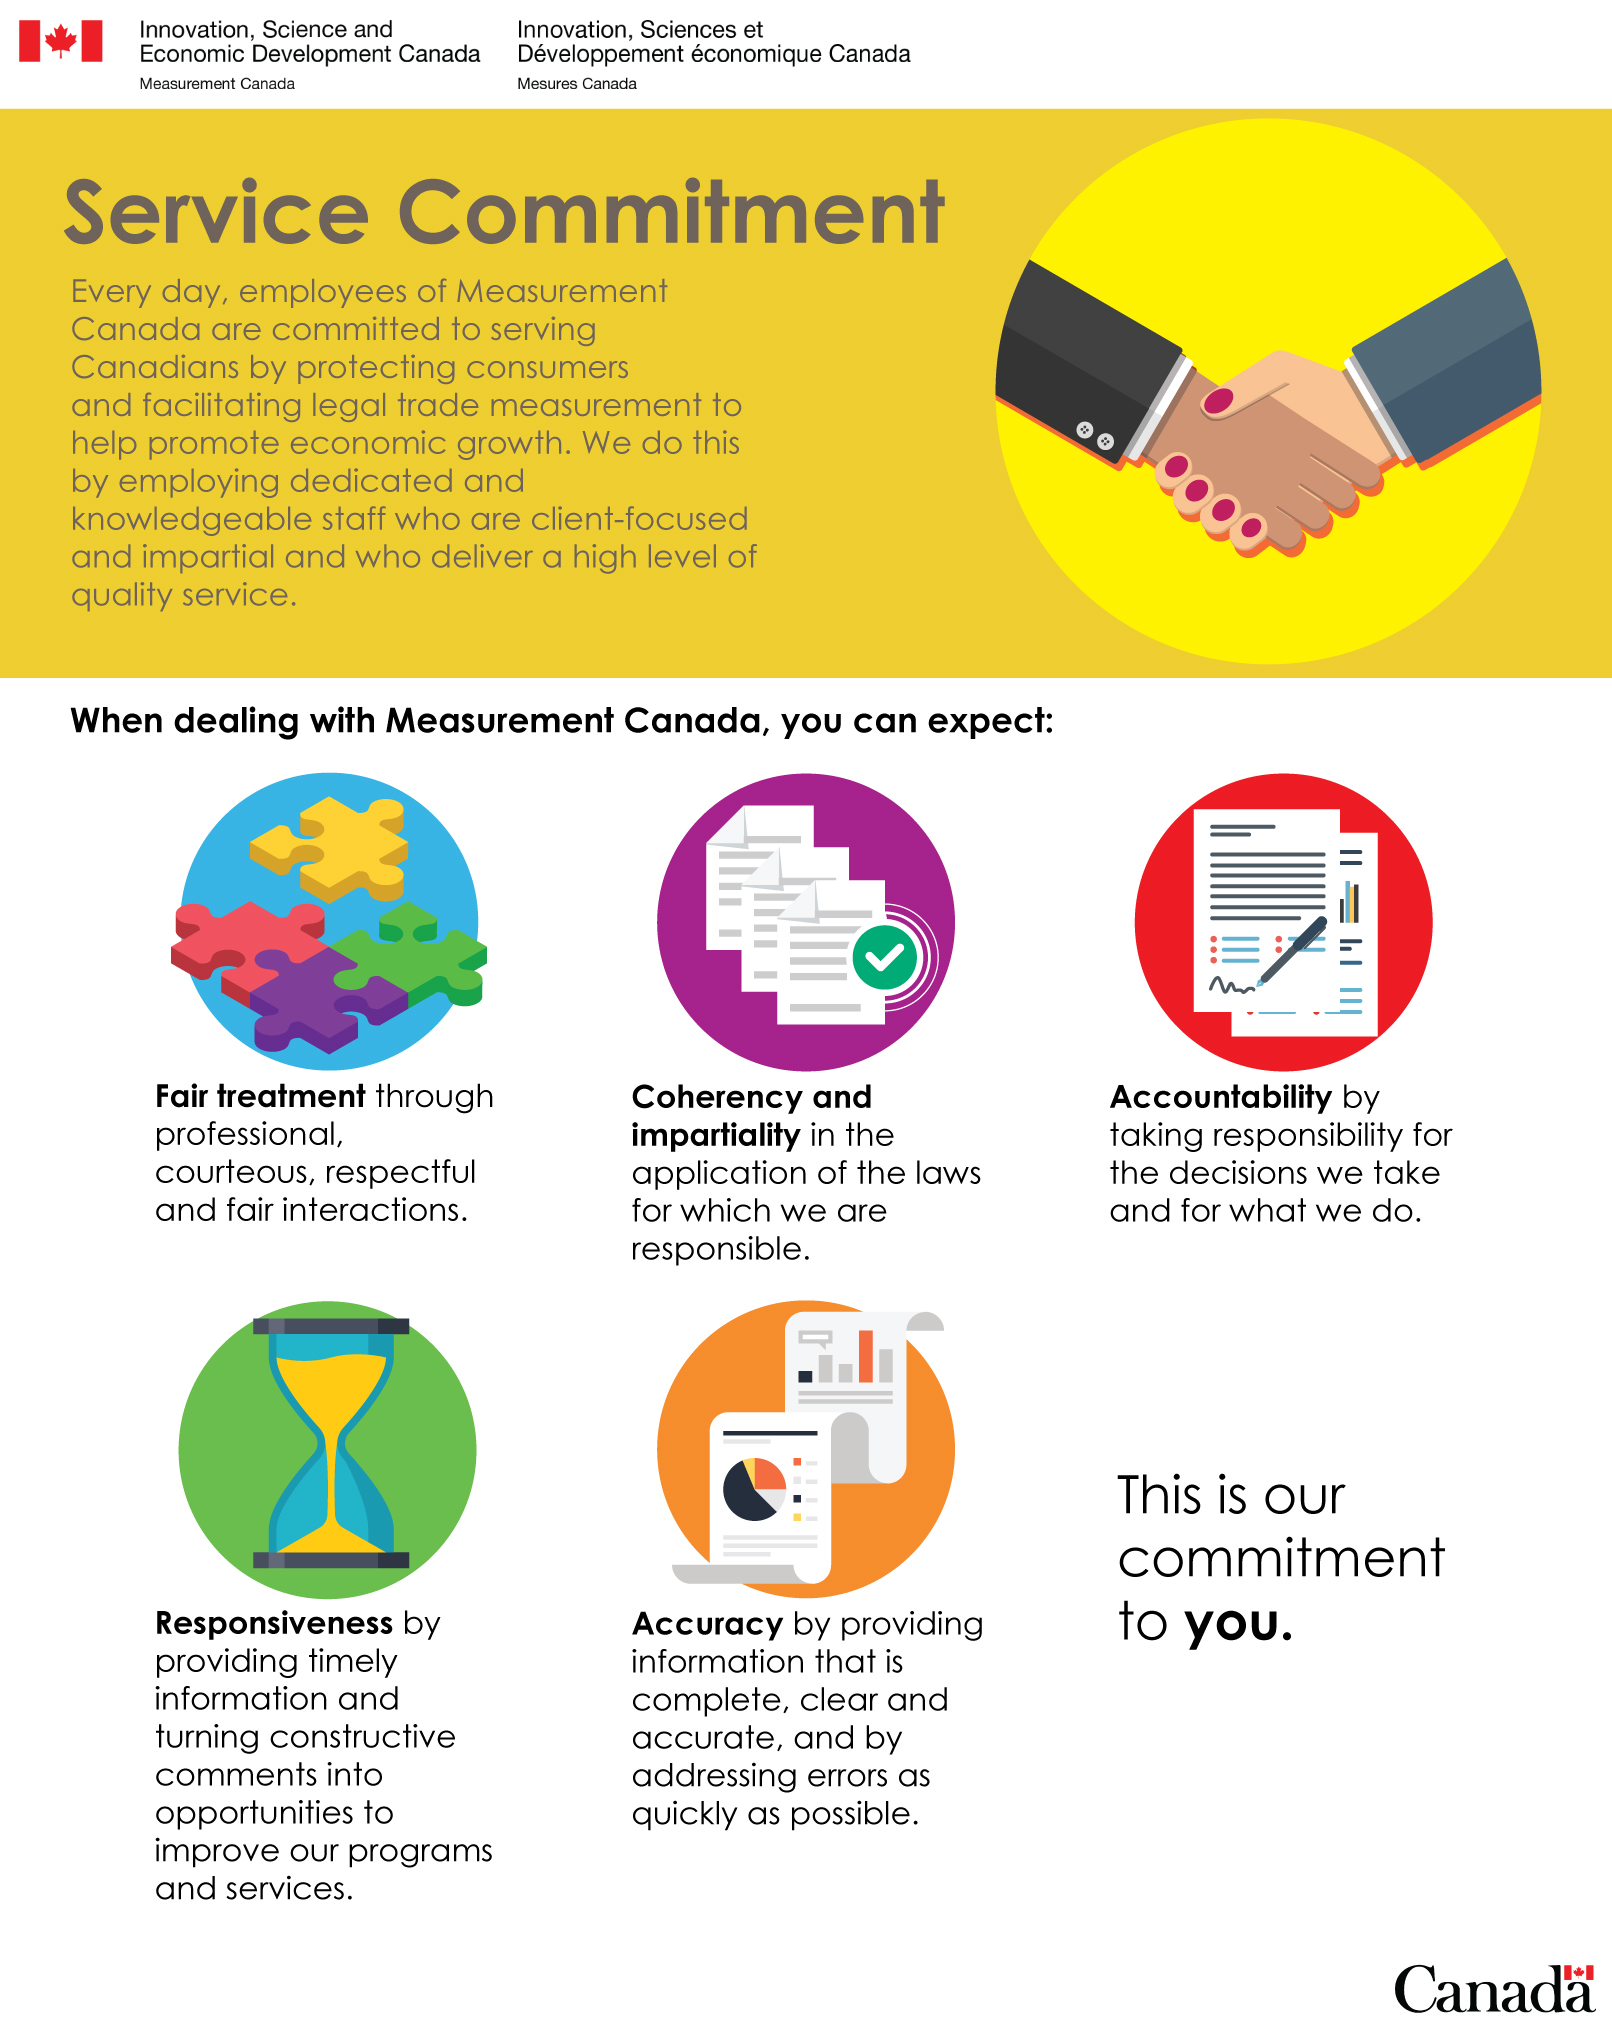 Service Commitment - the long description is located below the image